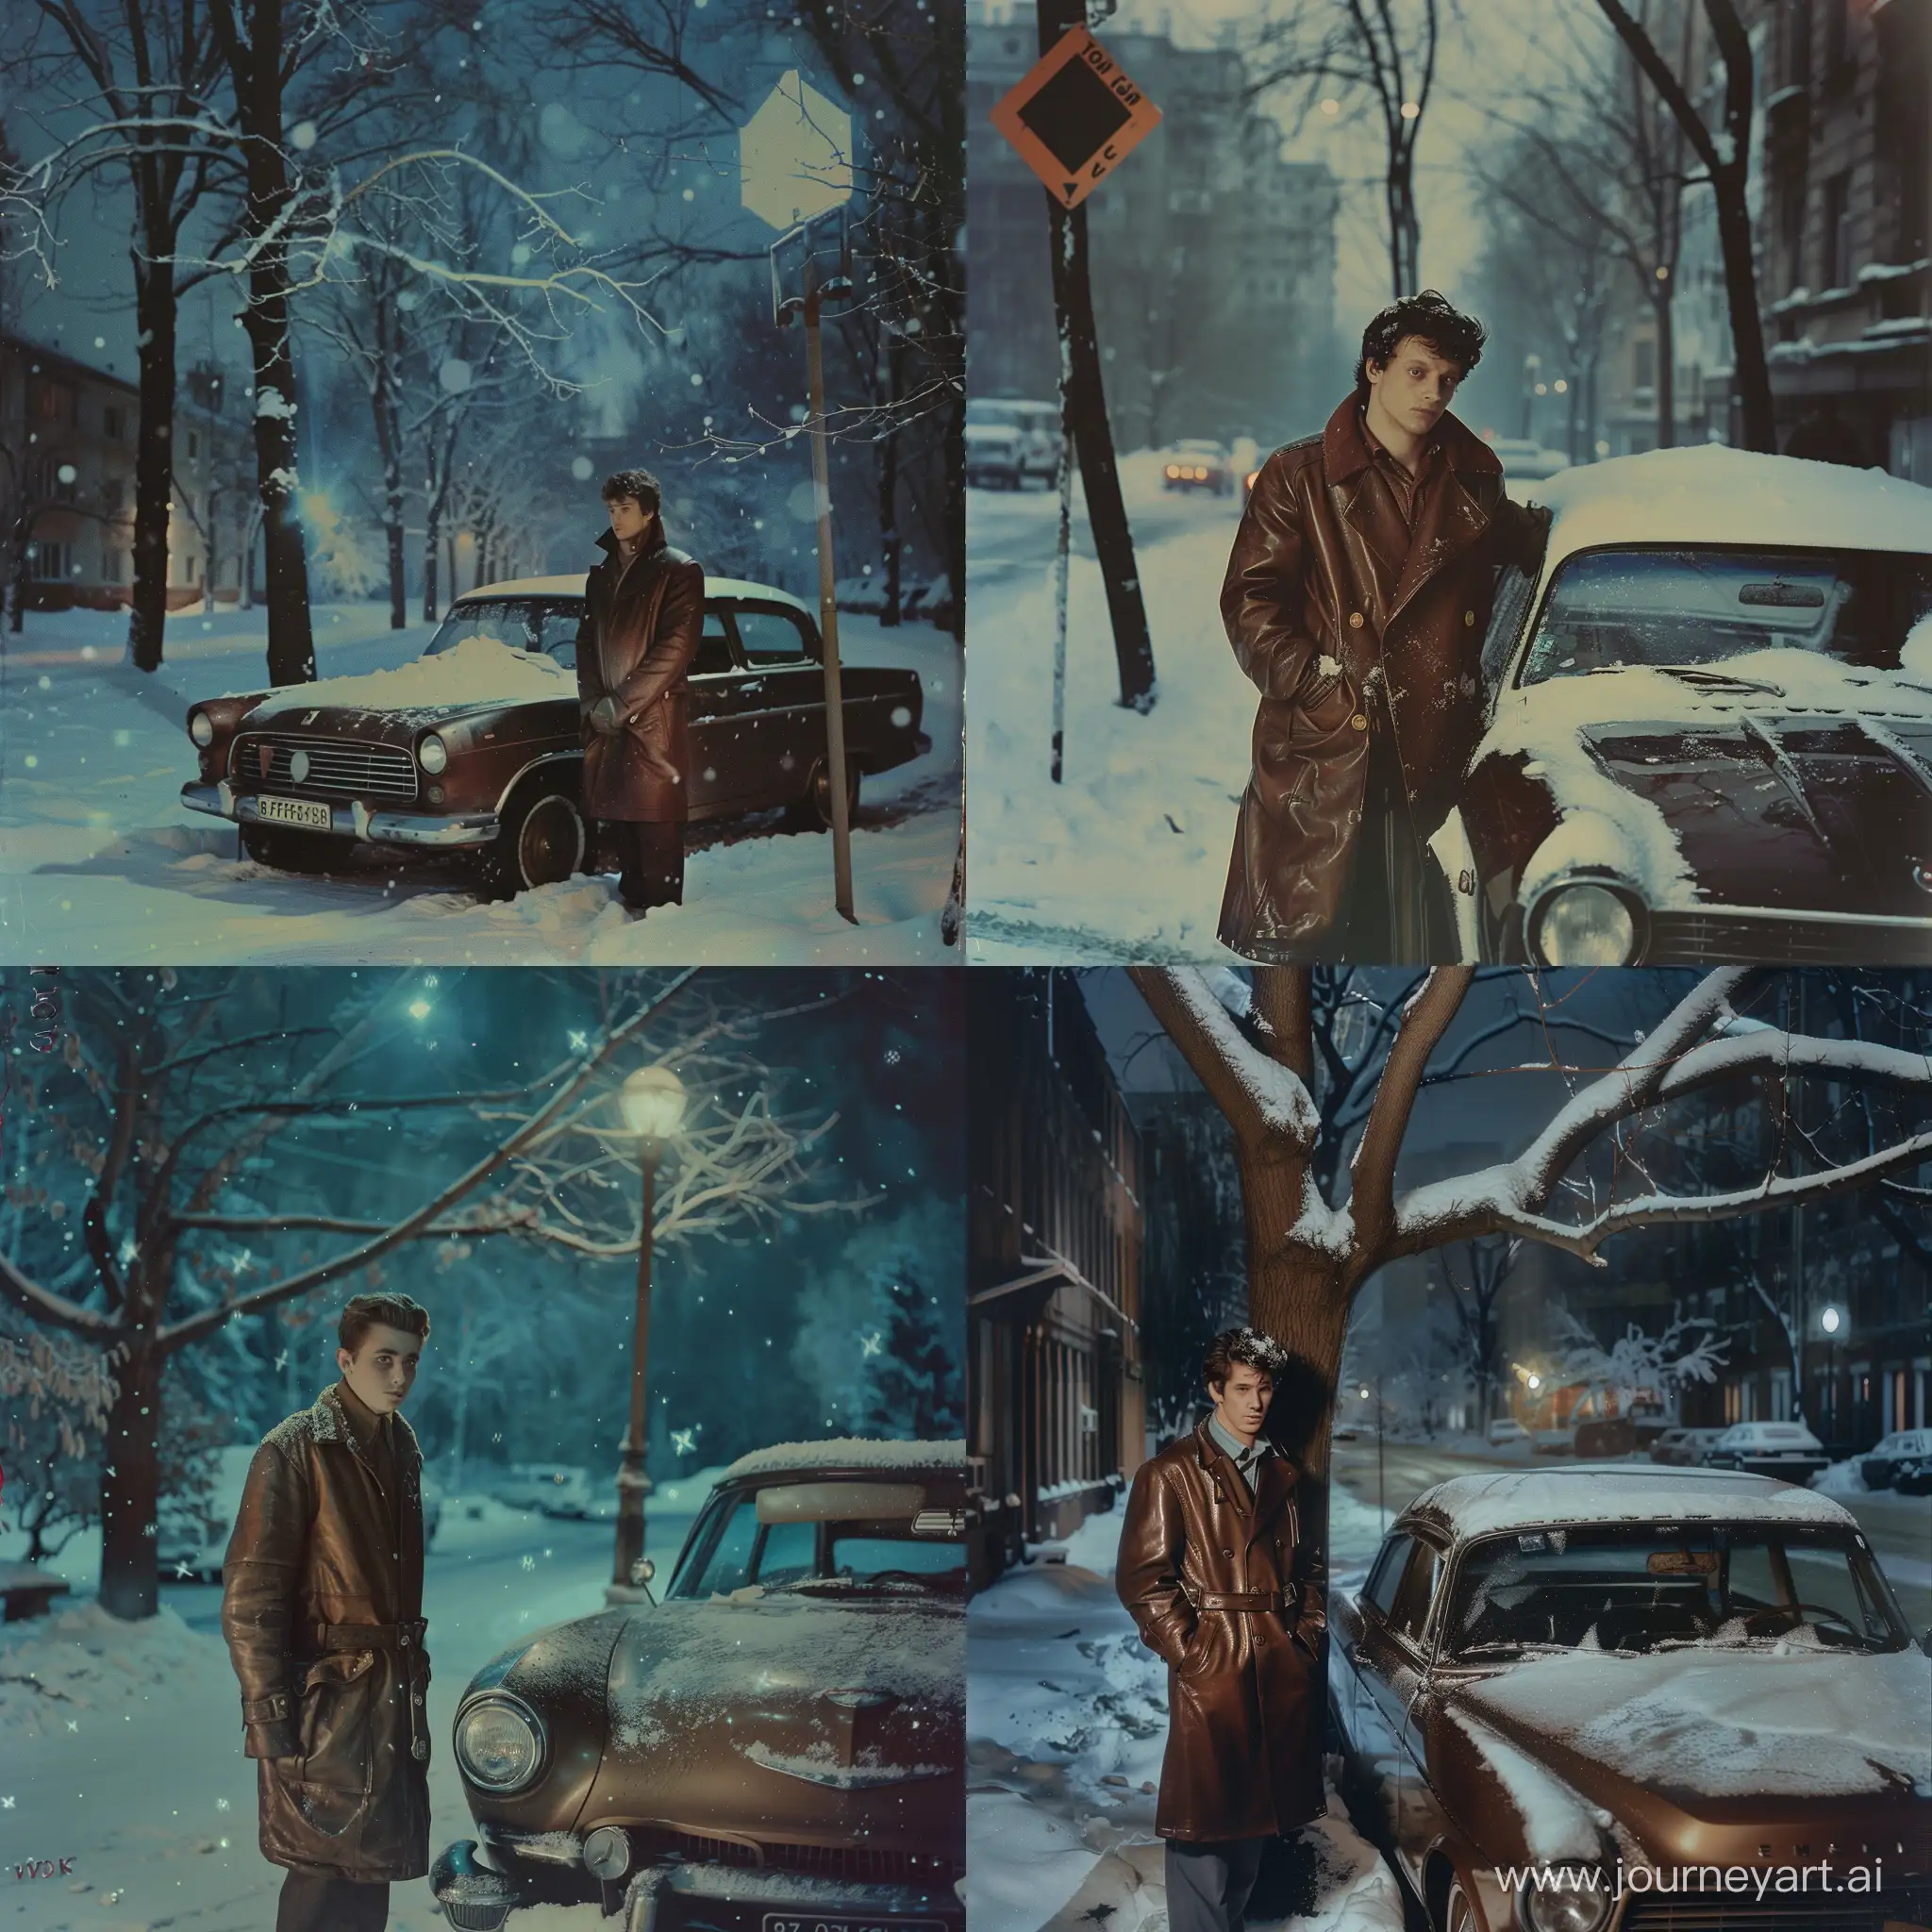 Man-in-Snowy-Urban-Scene-Next-to-Parked-Car-Cinematic-Album-Cover